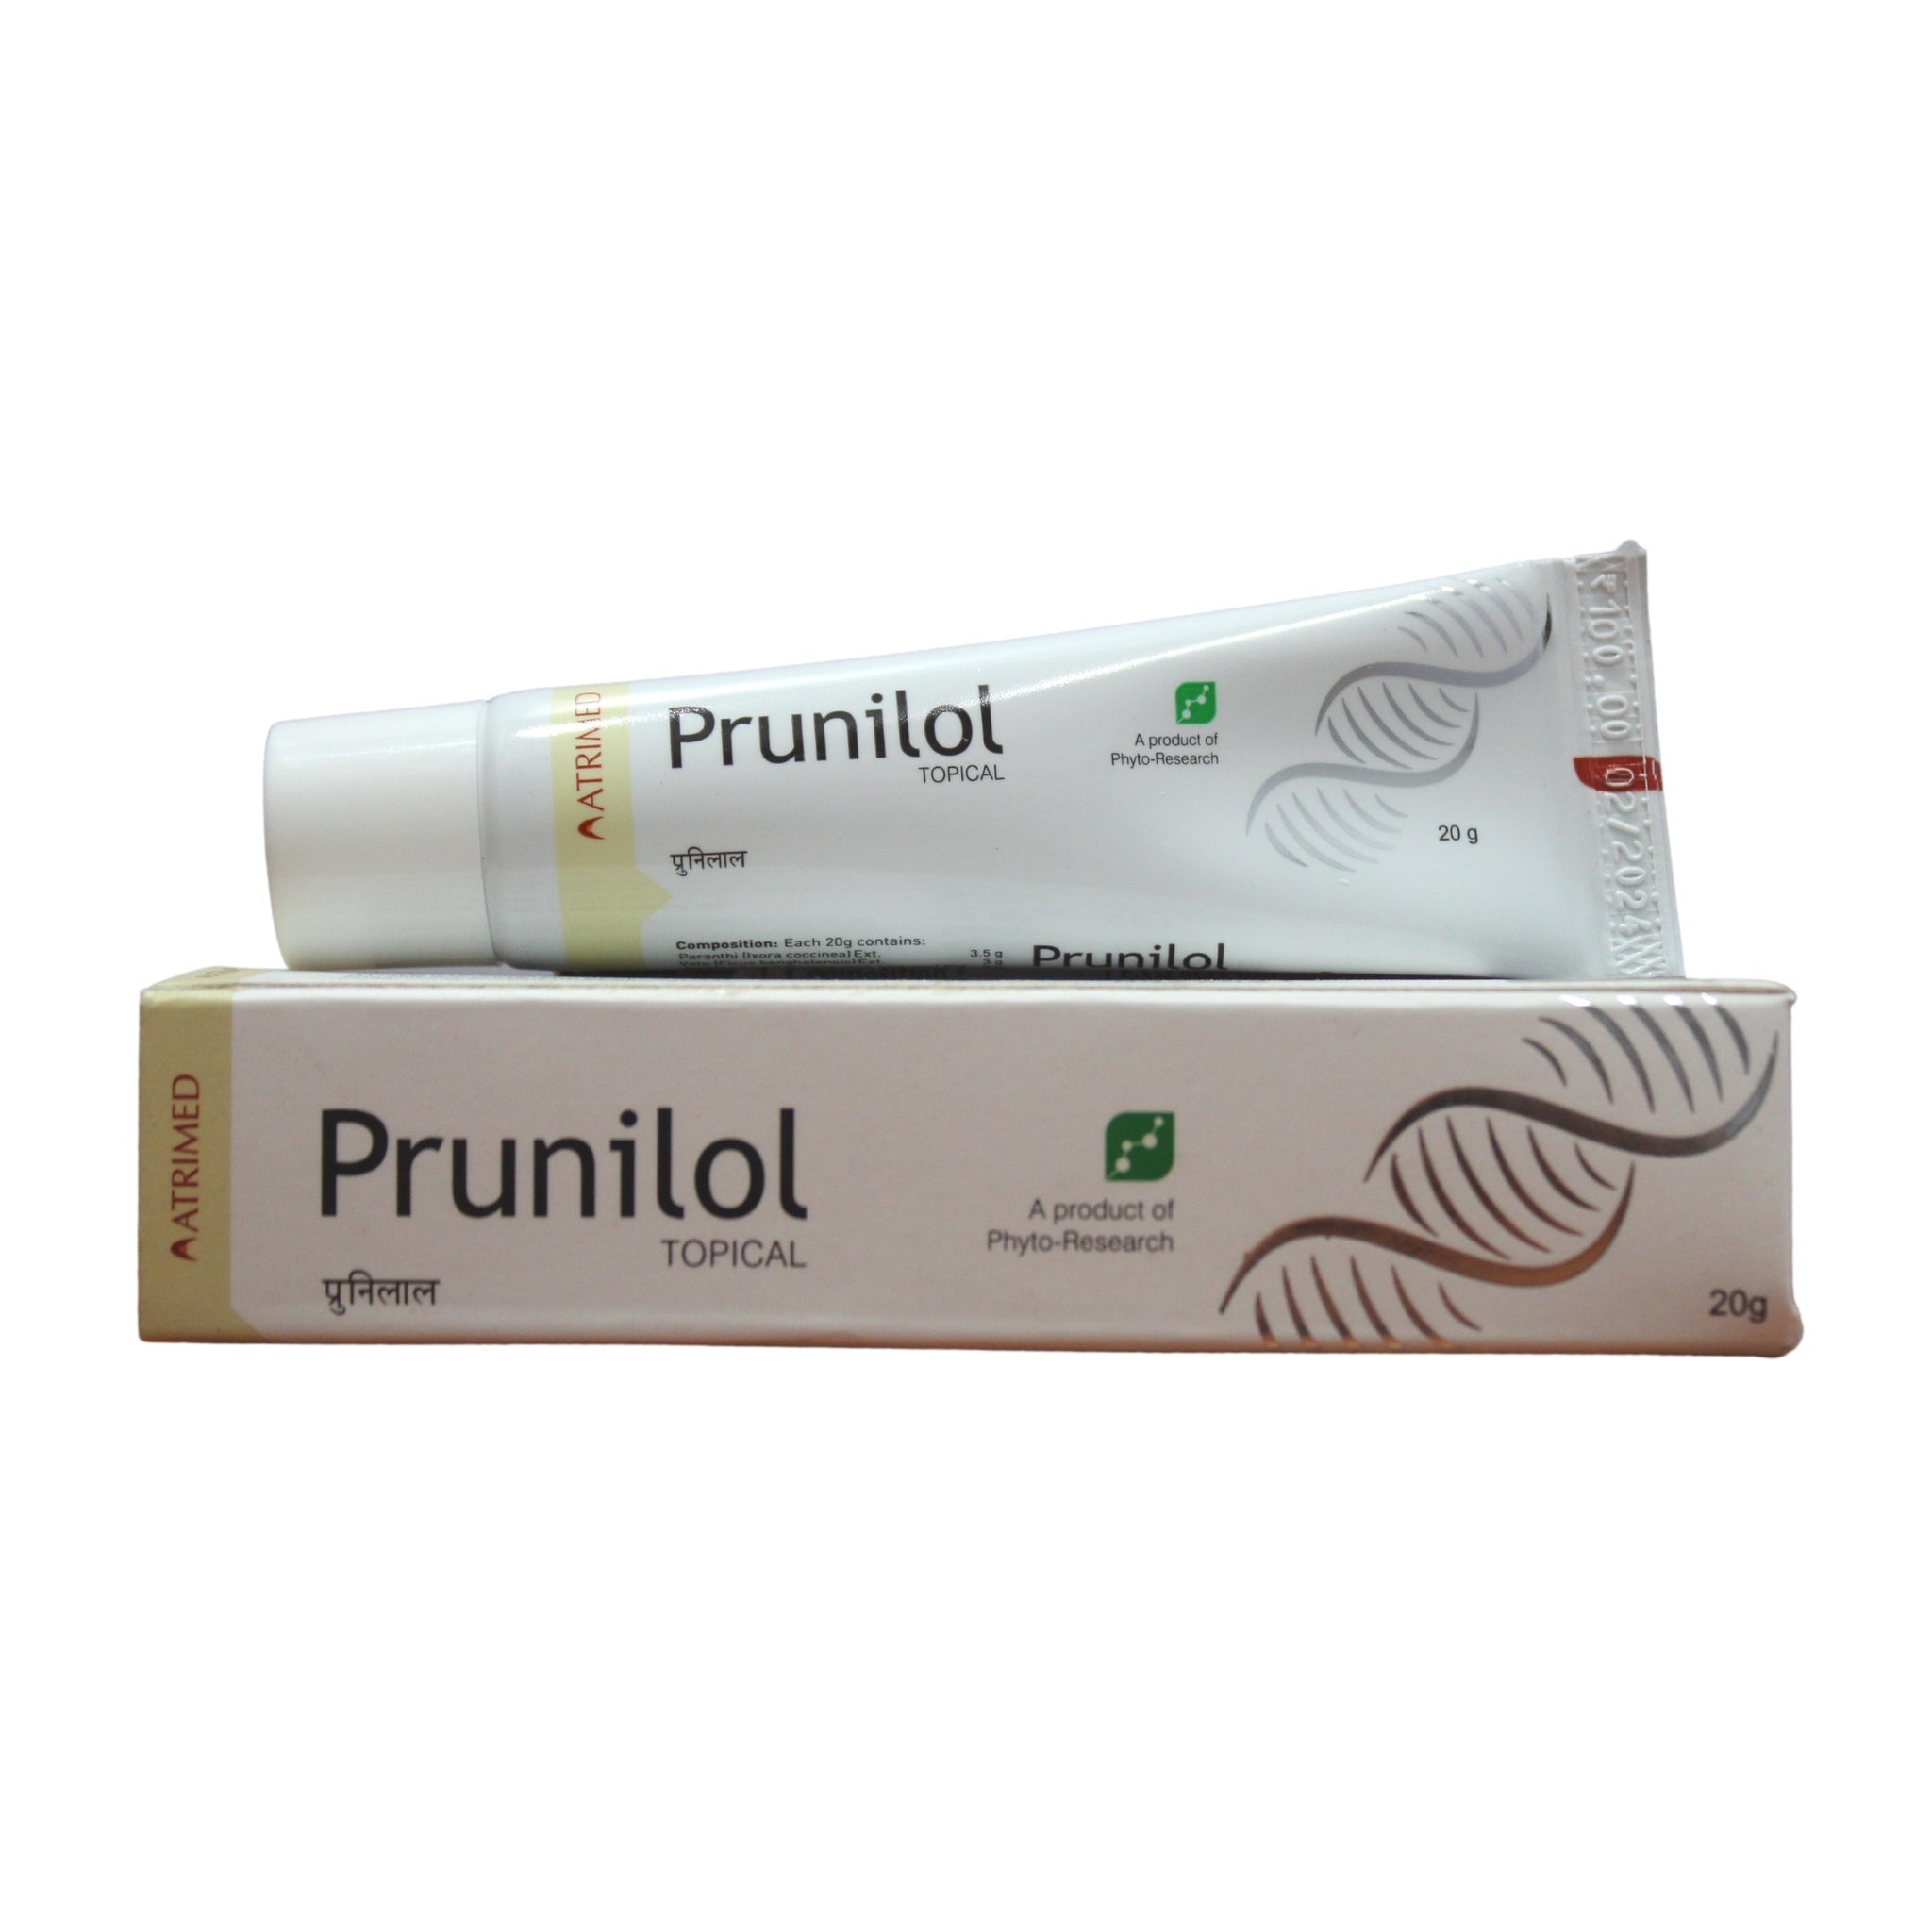 Prunilol topical 20gm Atrimed